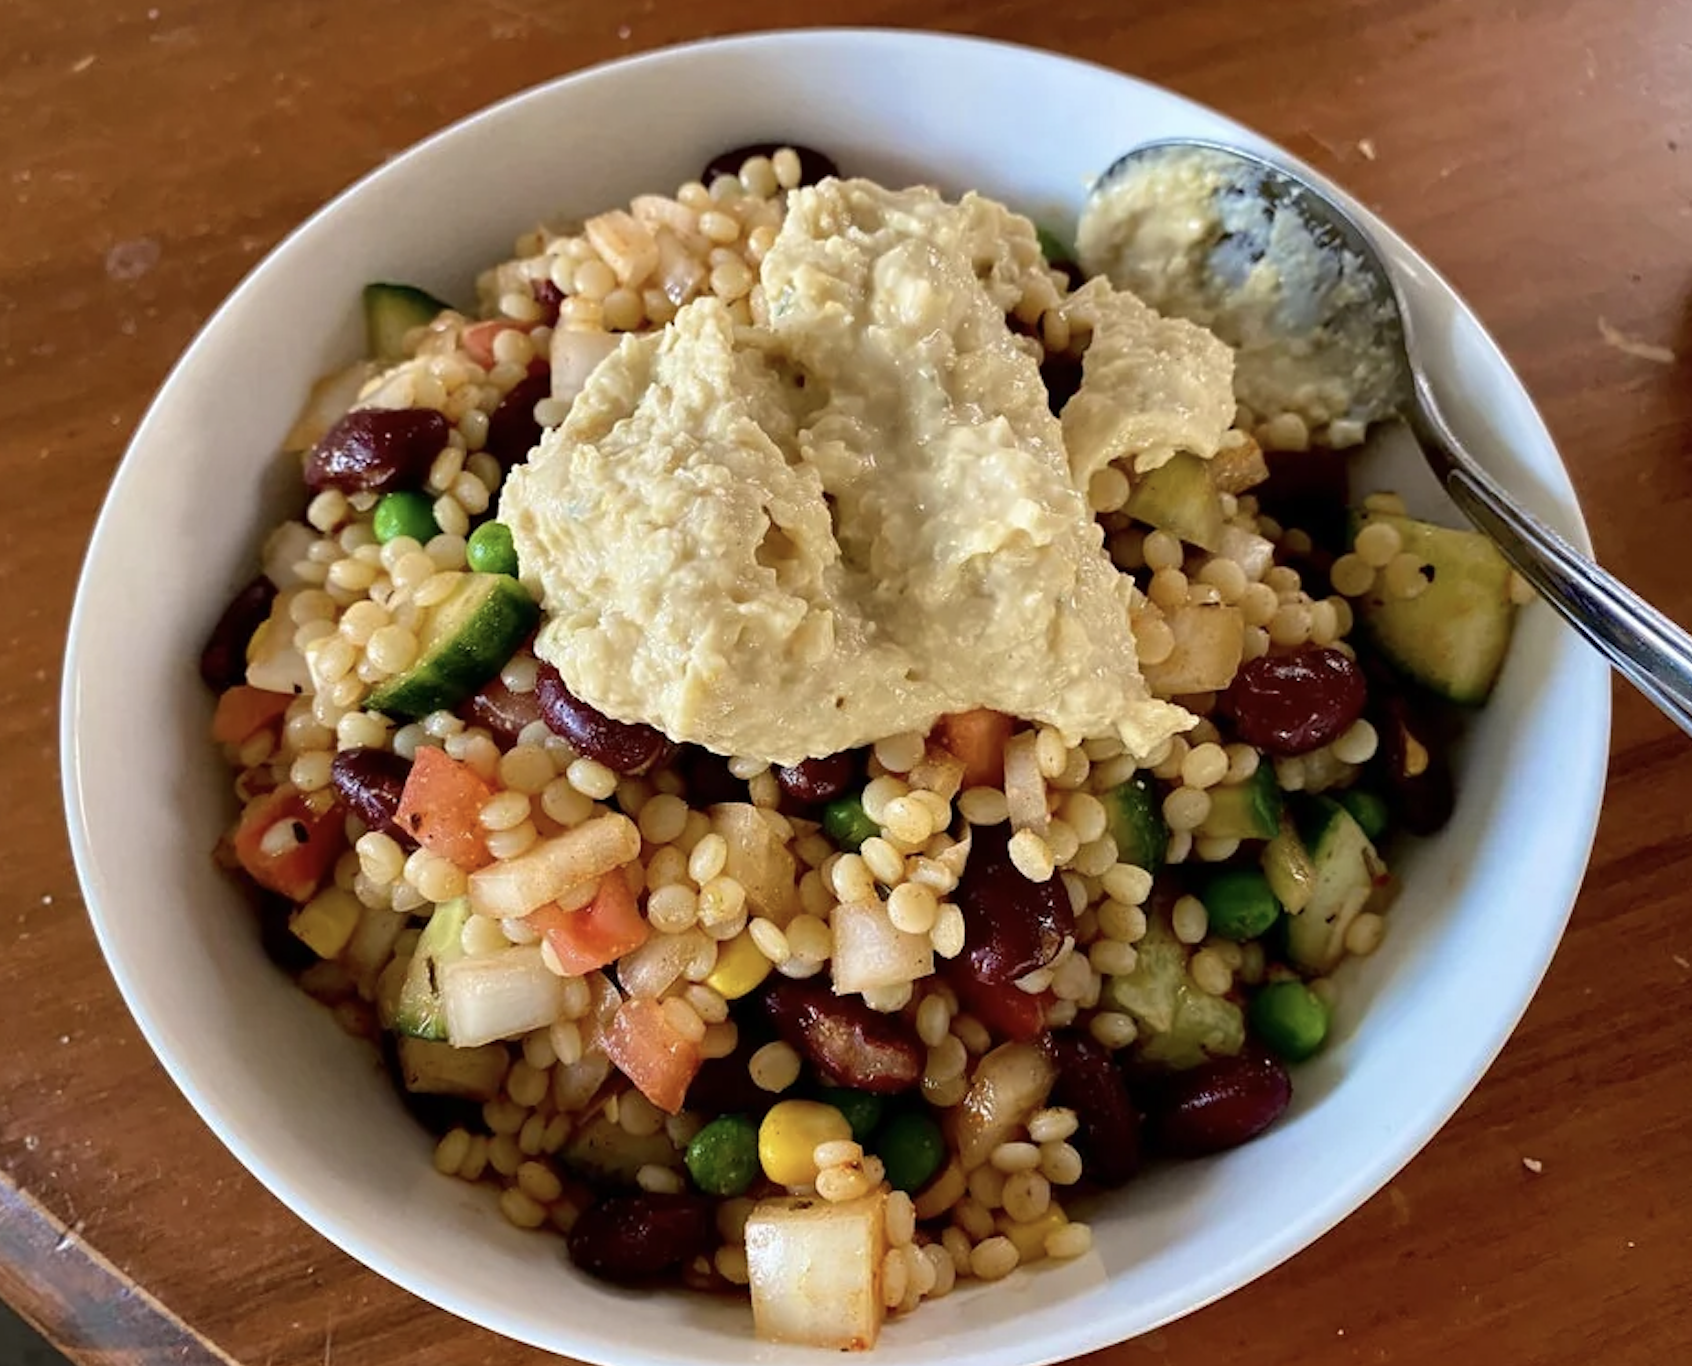 A bowl of mixed grain salad with a dollop of hummus on top, next to a spoon